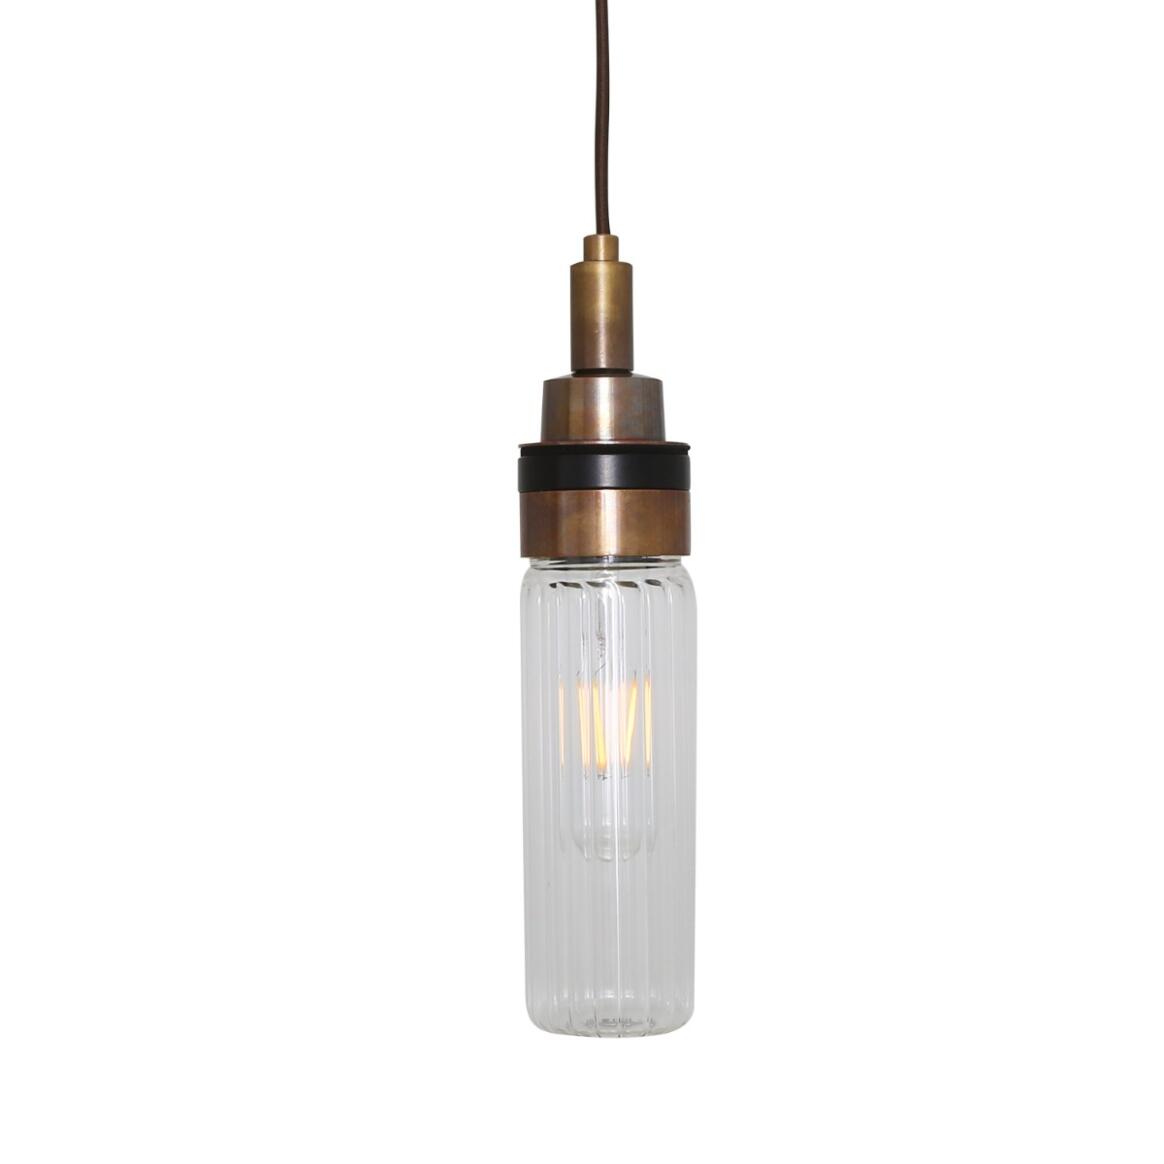 Delta Tube Glass and Brass Bathroom Pendant IP65 main product image